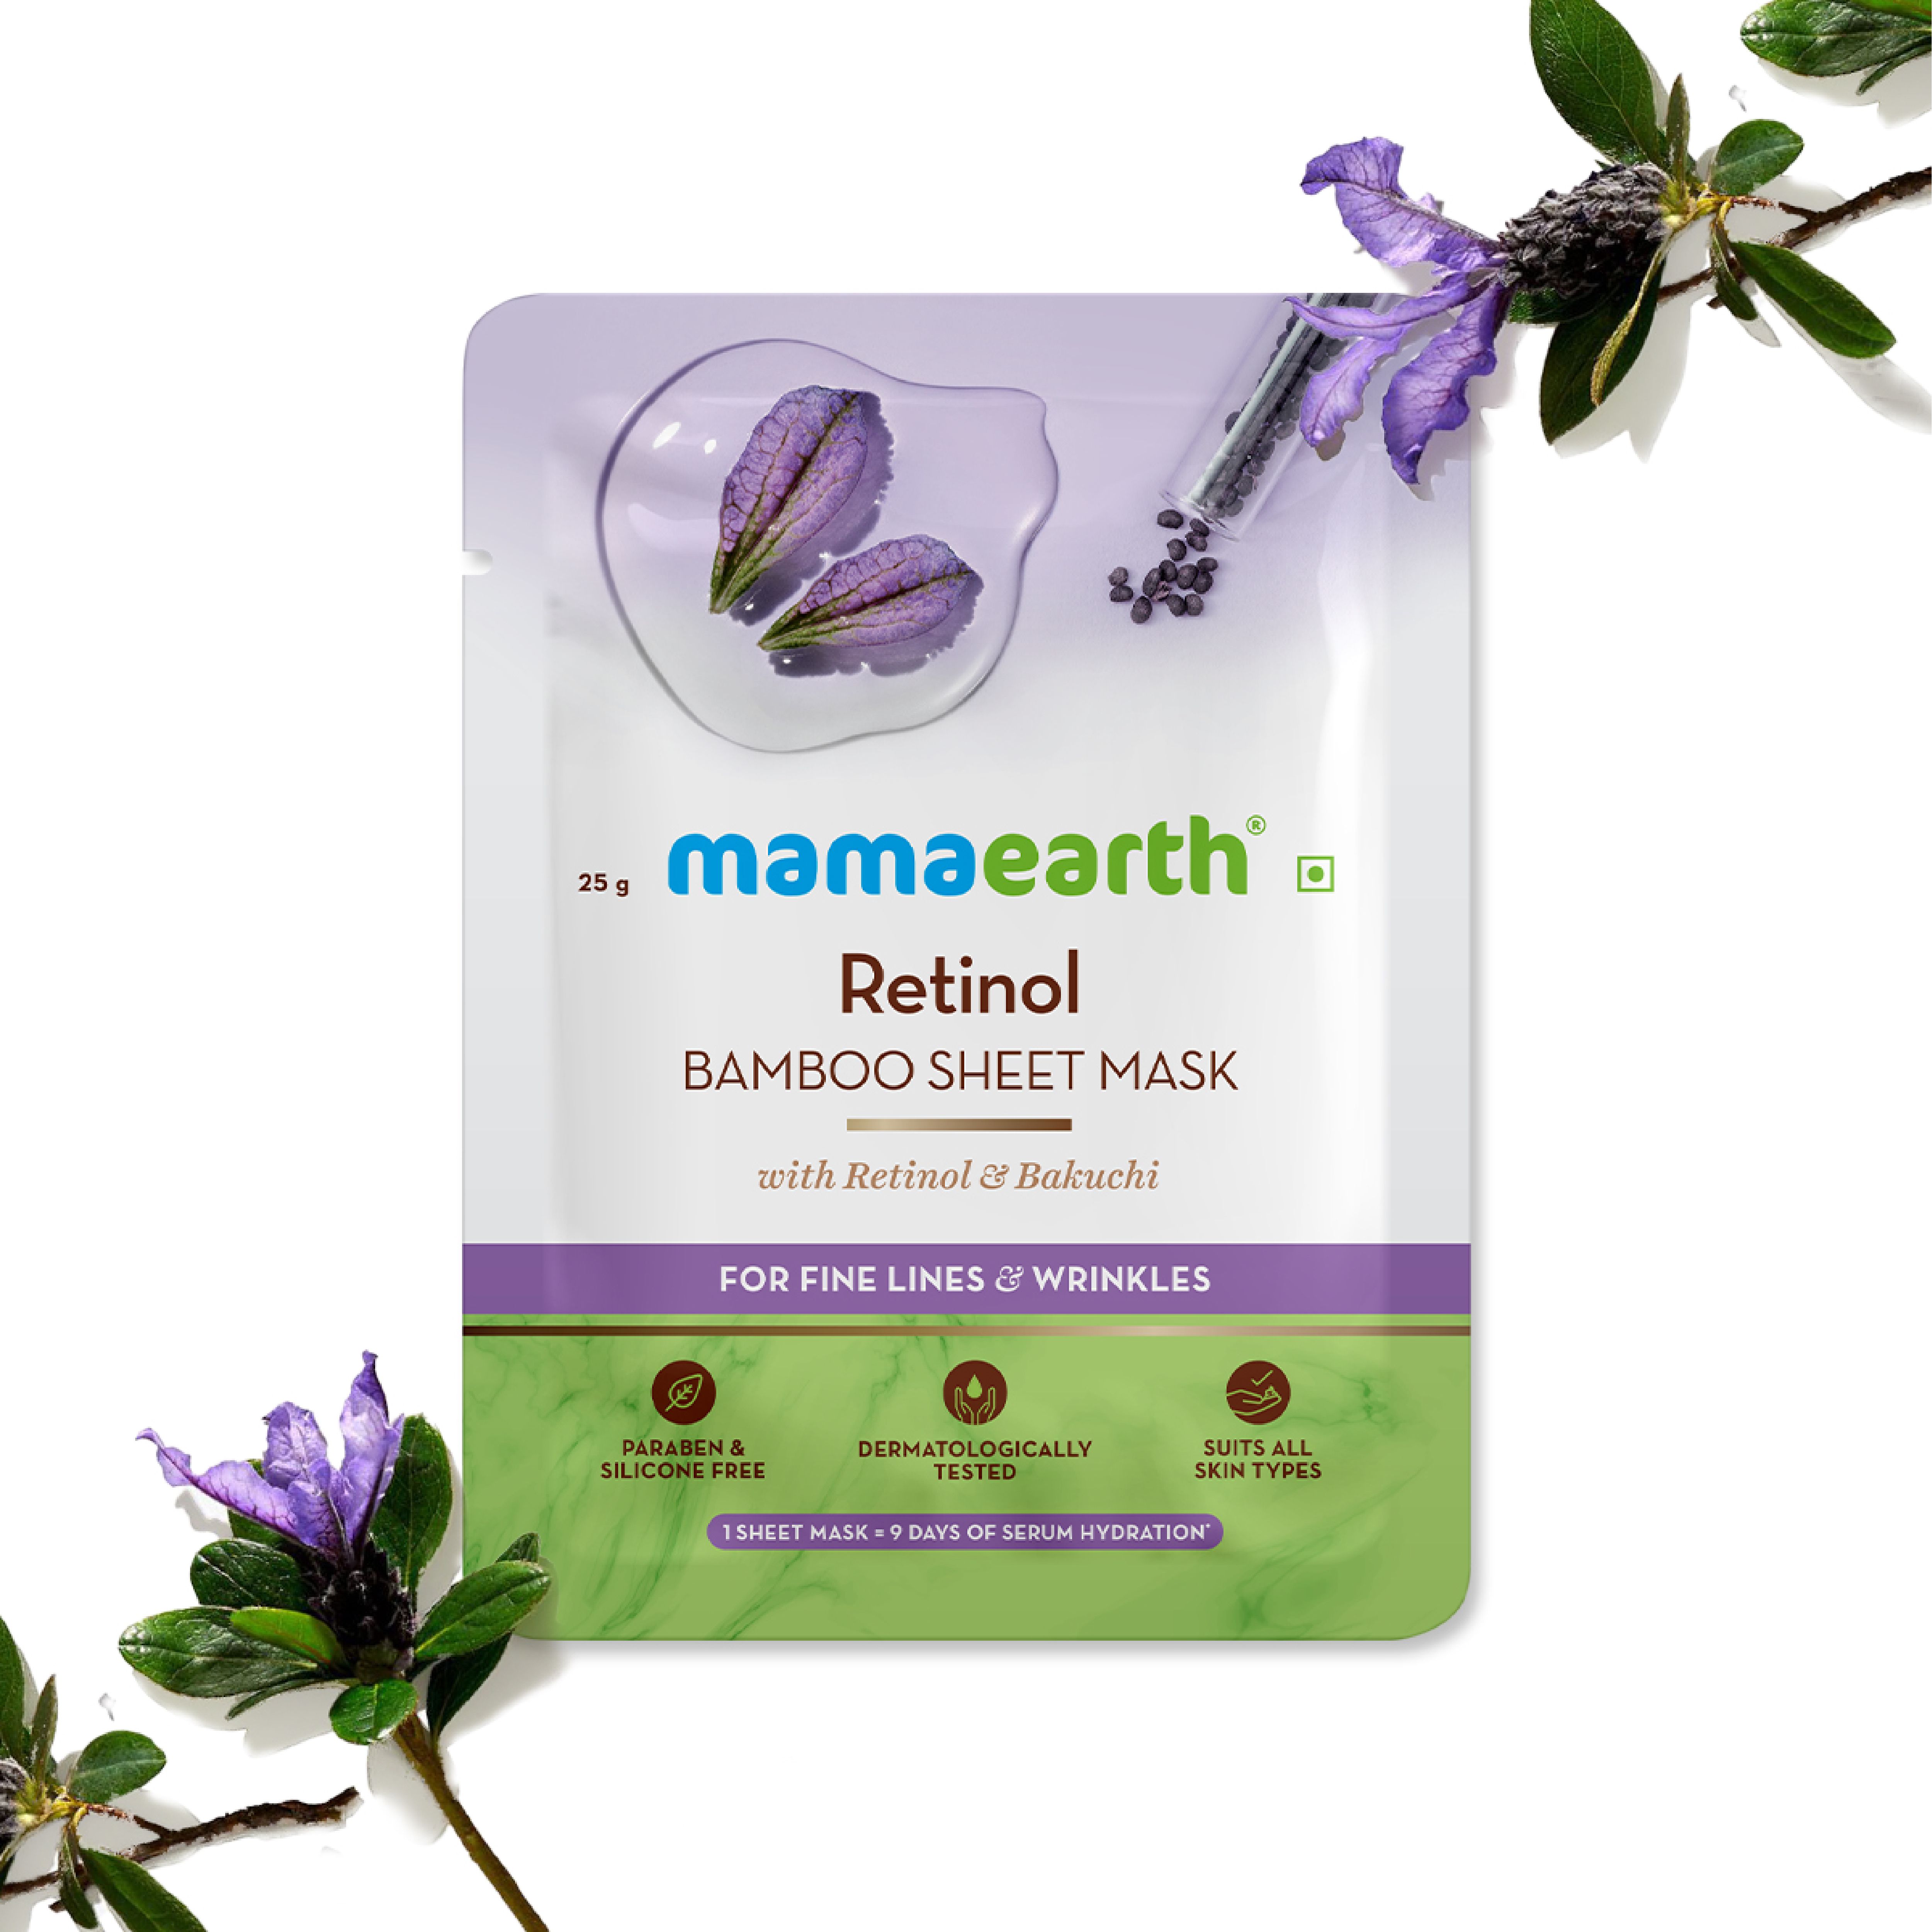 Mamaearth Retinol Bamboo Sheet Mask Better Than Others Available in The Market